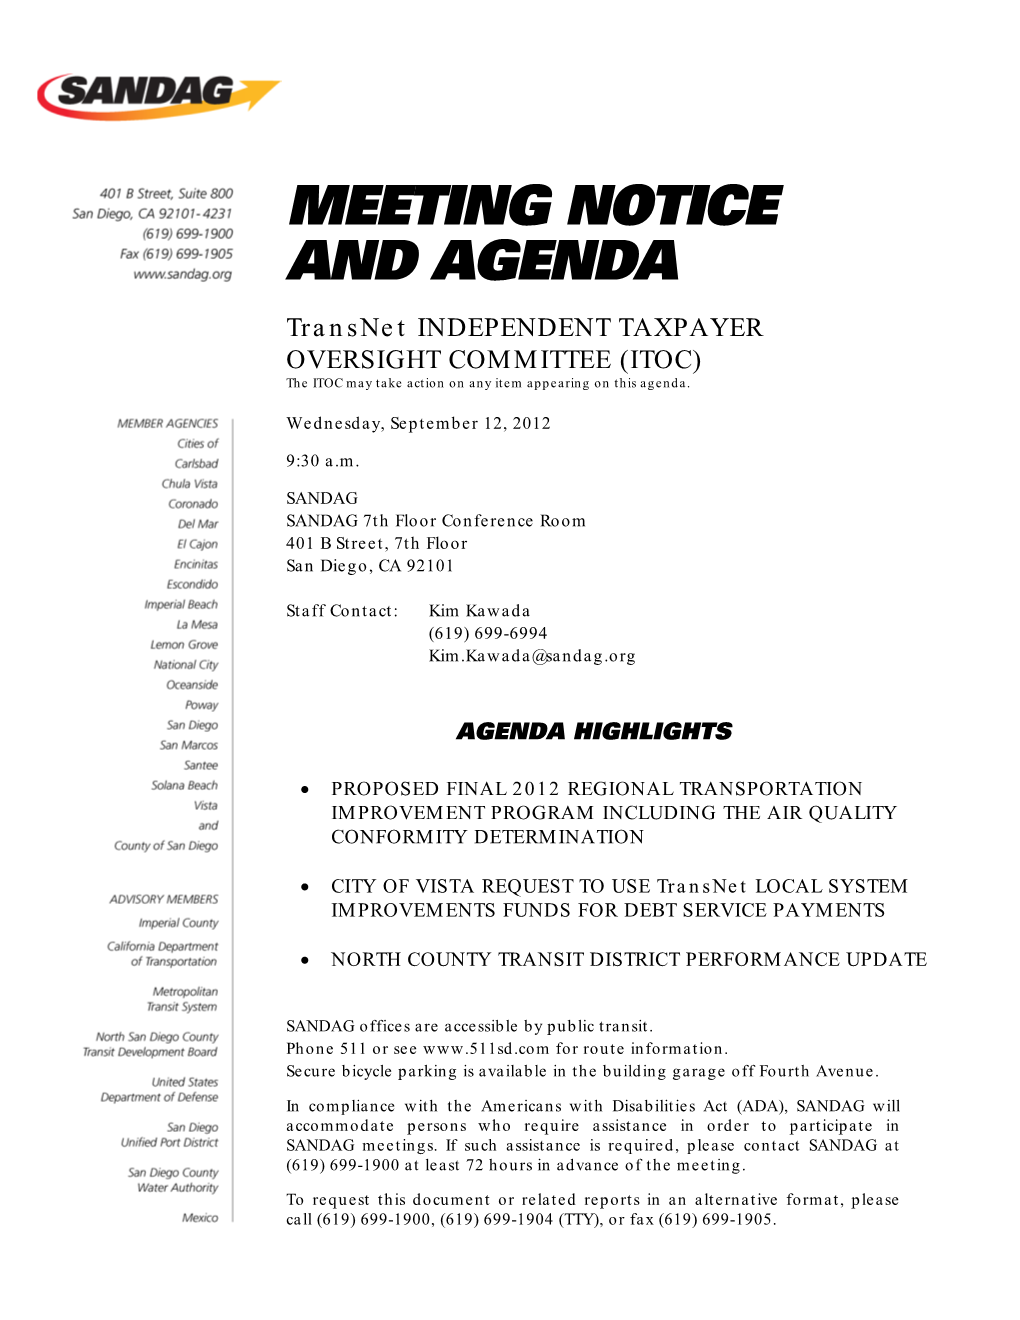 AGENDA Transnet INDEPENDENT TAXPAYER OVERSIGHT COMMITTEE (ITOC) the ITOC May Take Action on Any Item Appearing on This Agenda